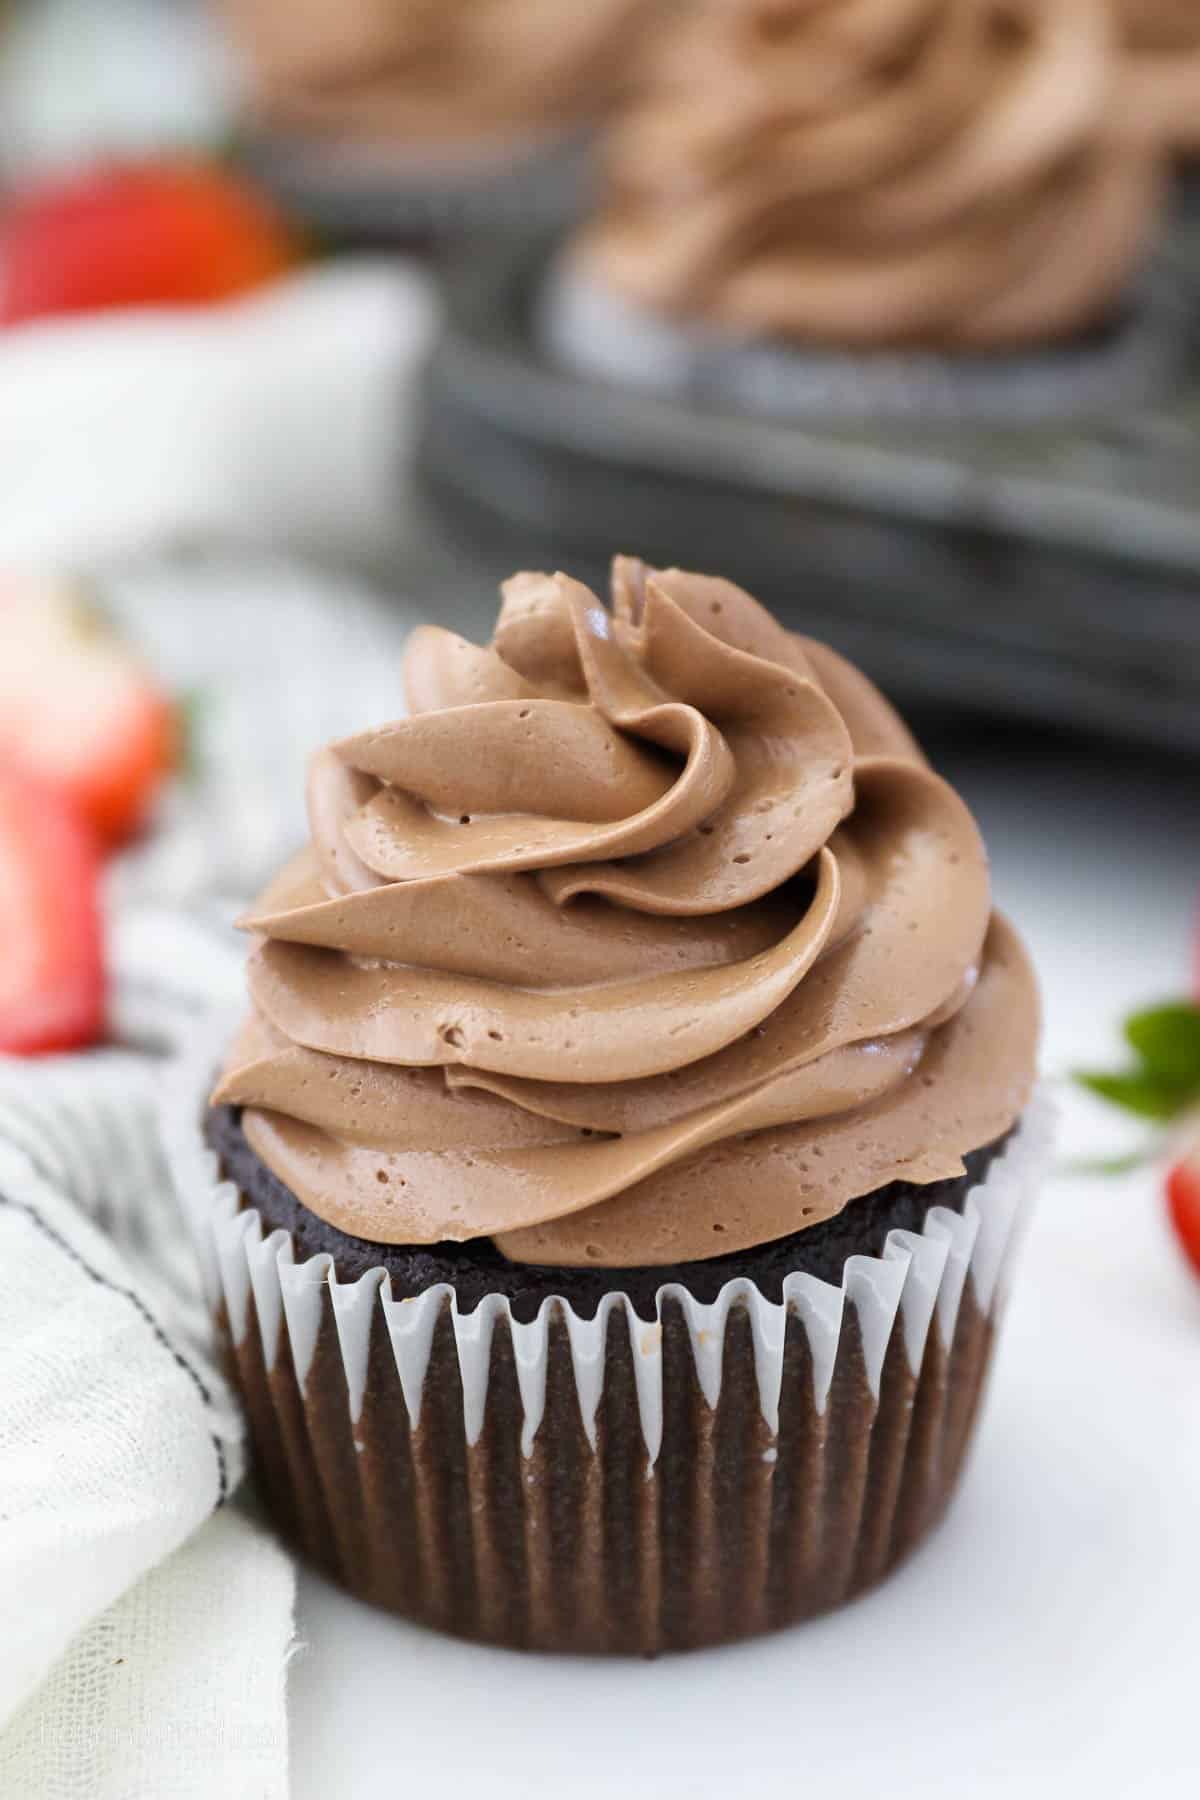 One chocolate cupcake frosted with chocolate Swiss meringue buttercream